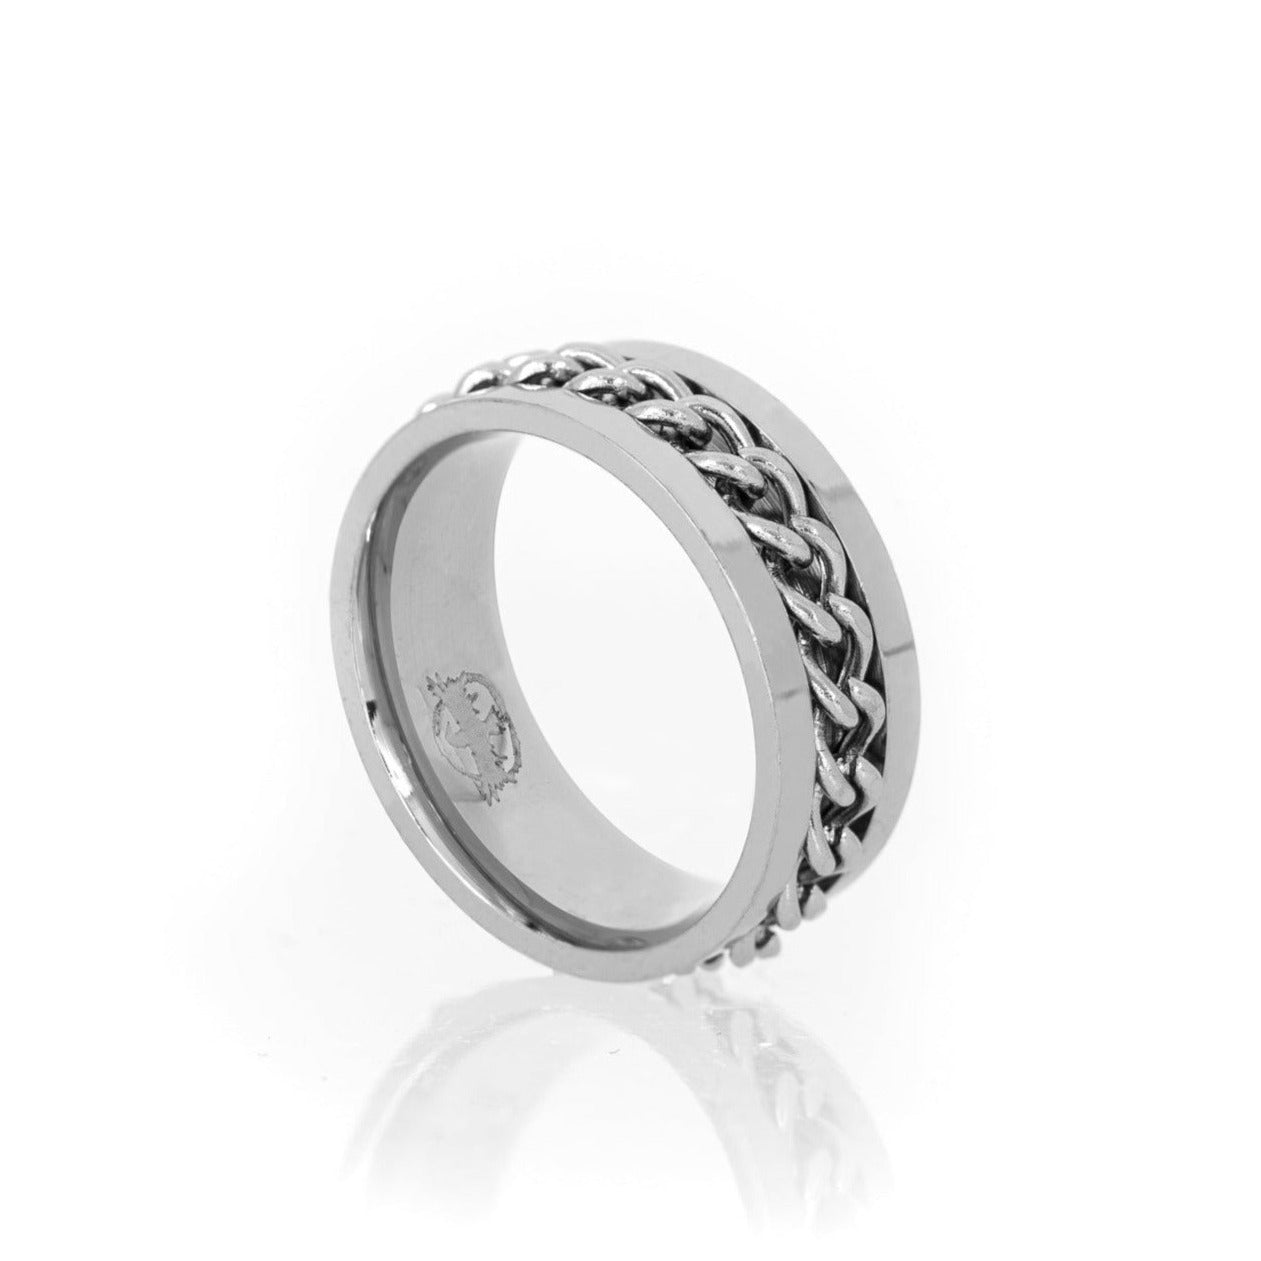 Stainless Steel Curb Chain Spinner Ring - Anxiety Ring - Black Feather Design